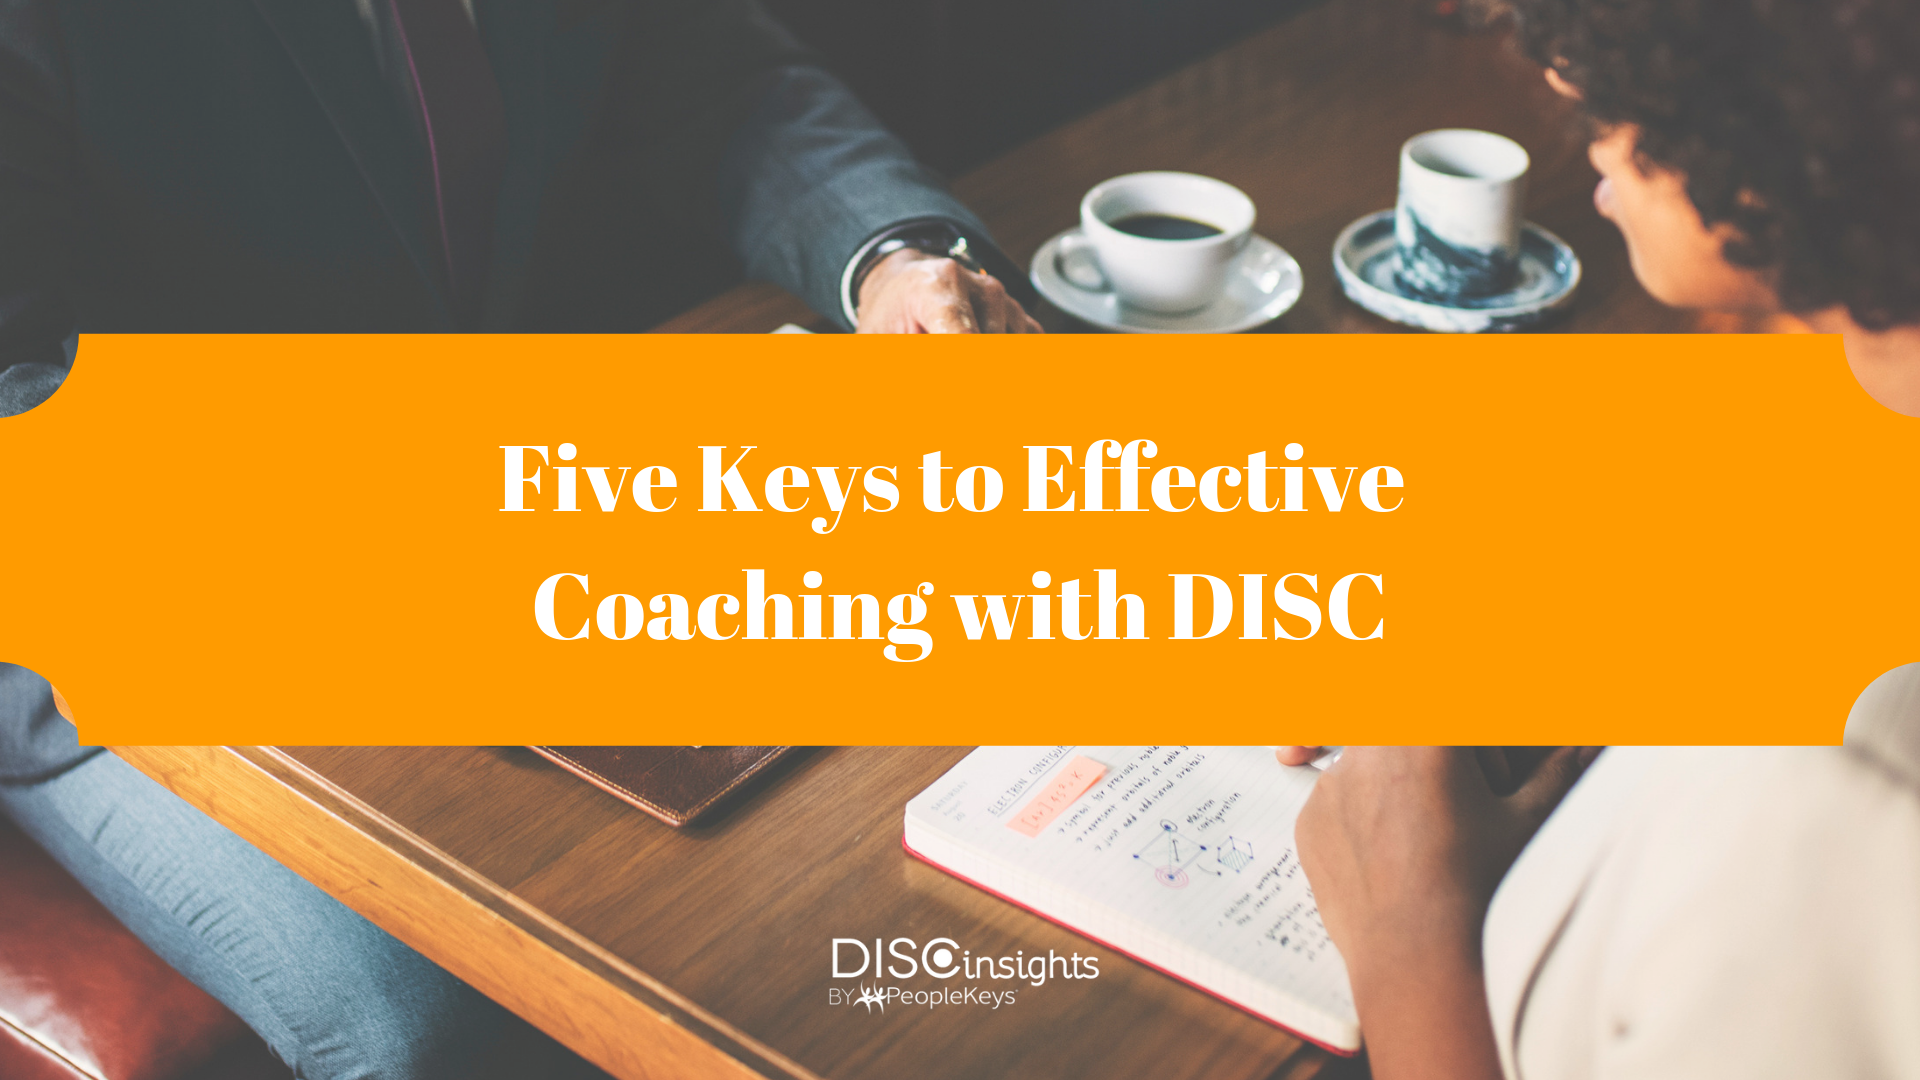 Five Keys to Effective Coaching with DISC